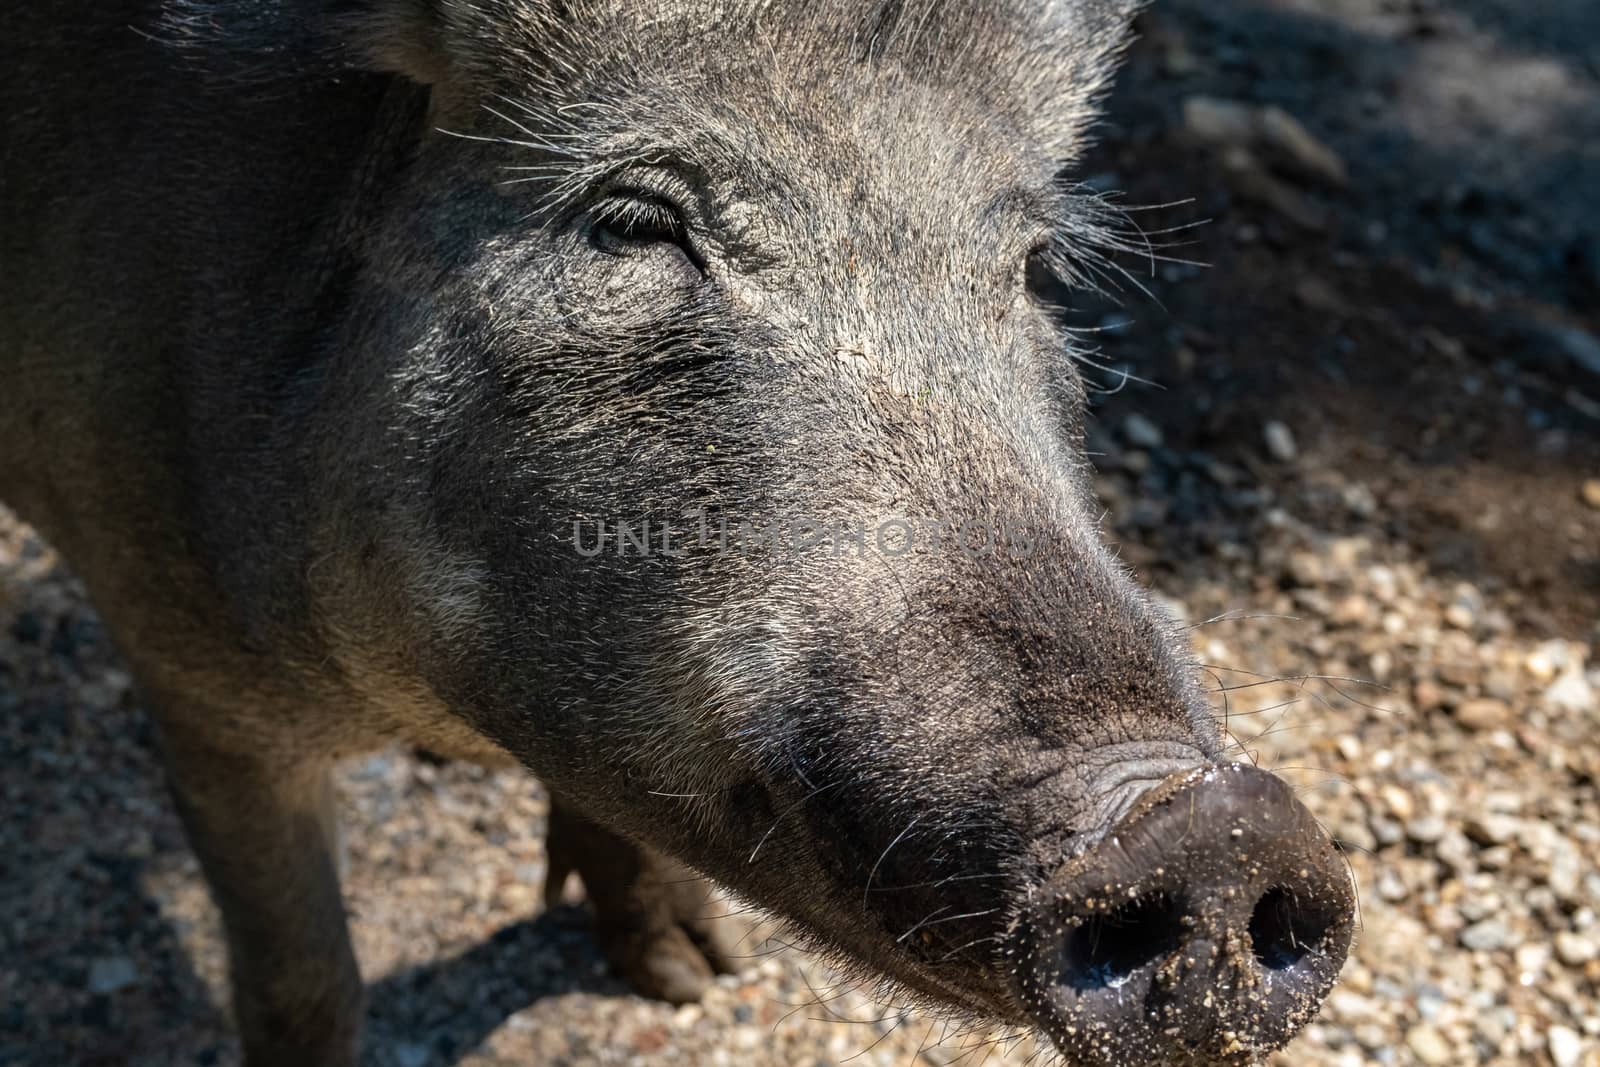 The face of a wild boar, a pig of the species Sus scrofa, is seen up close, showing the detail of her hair and sand stuck to her snout.